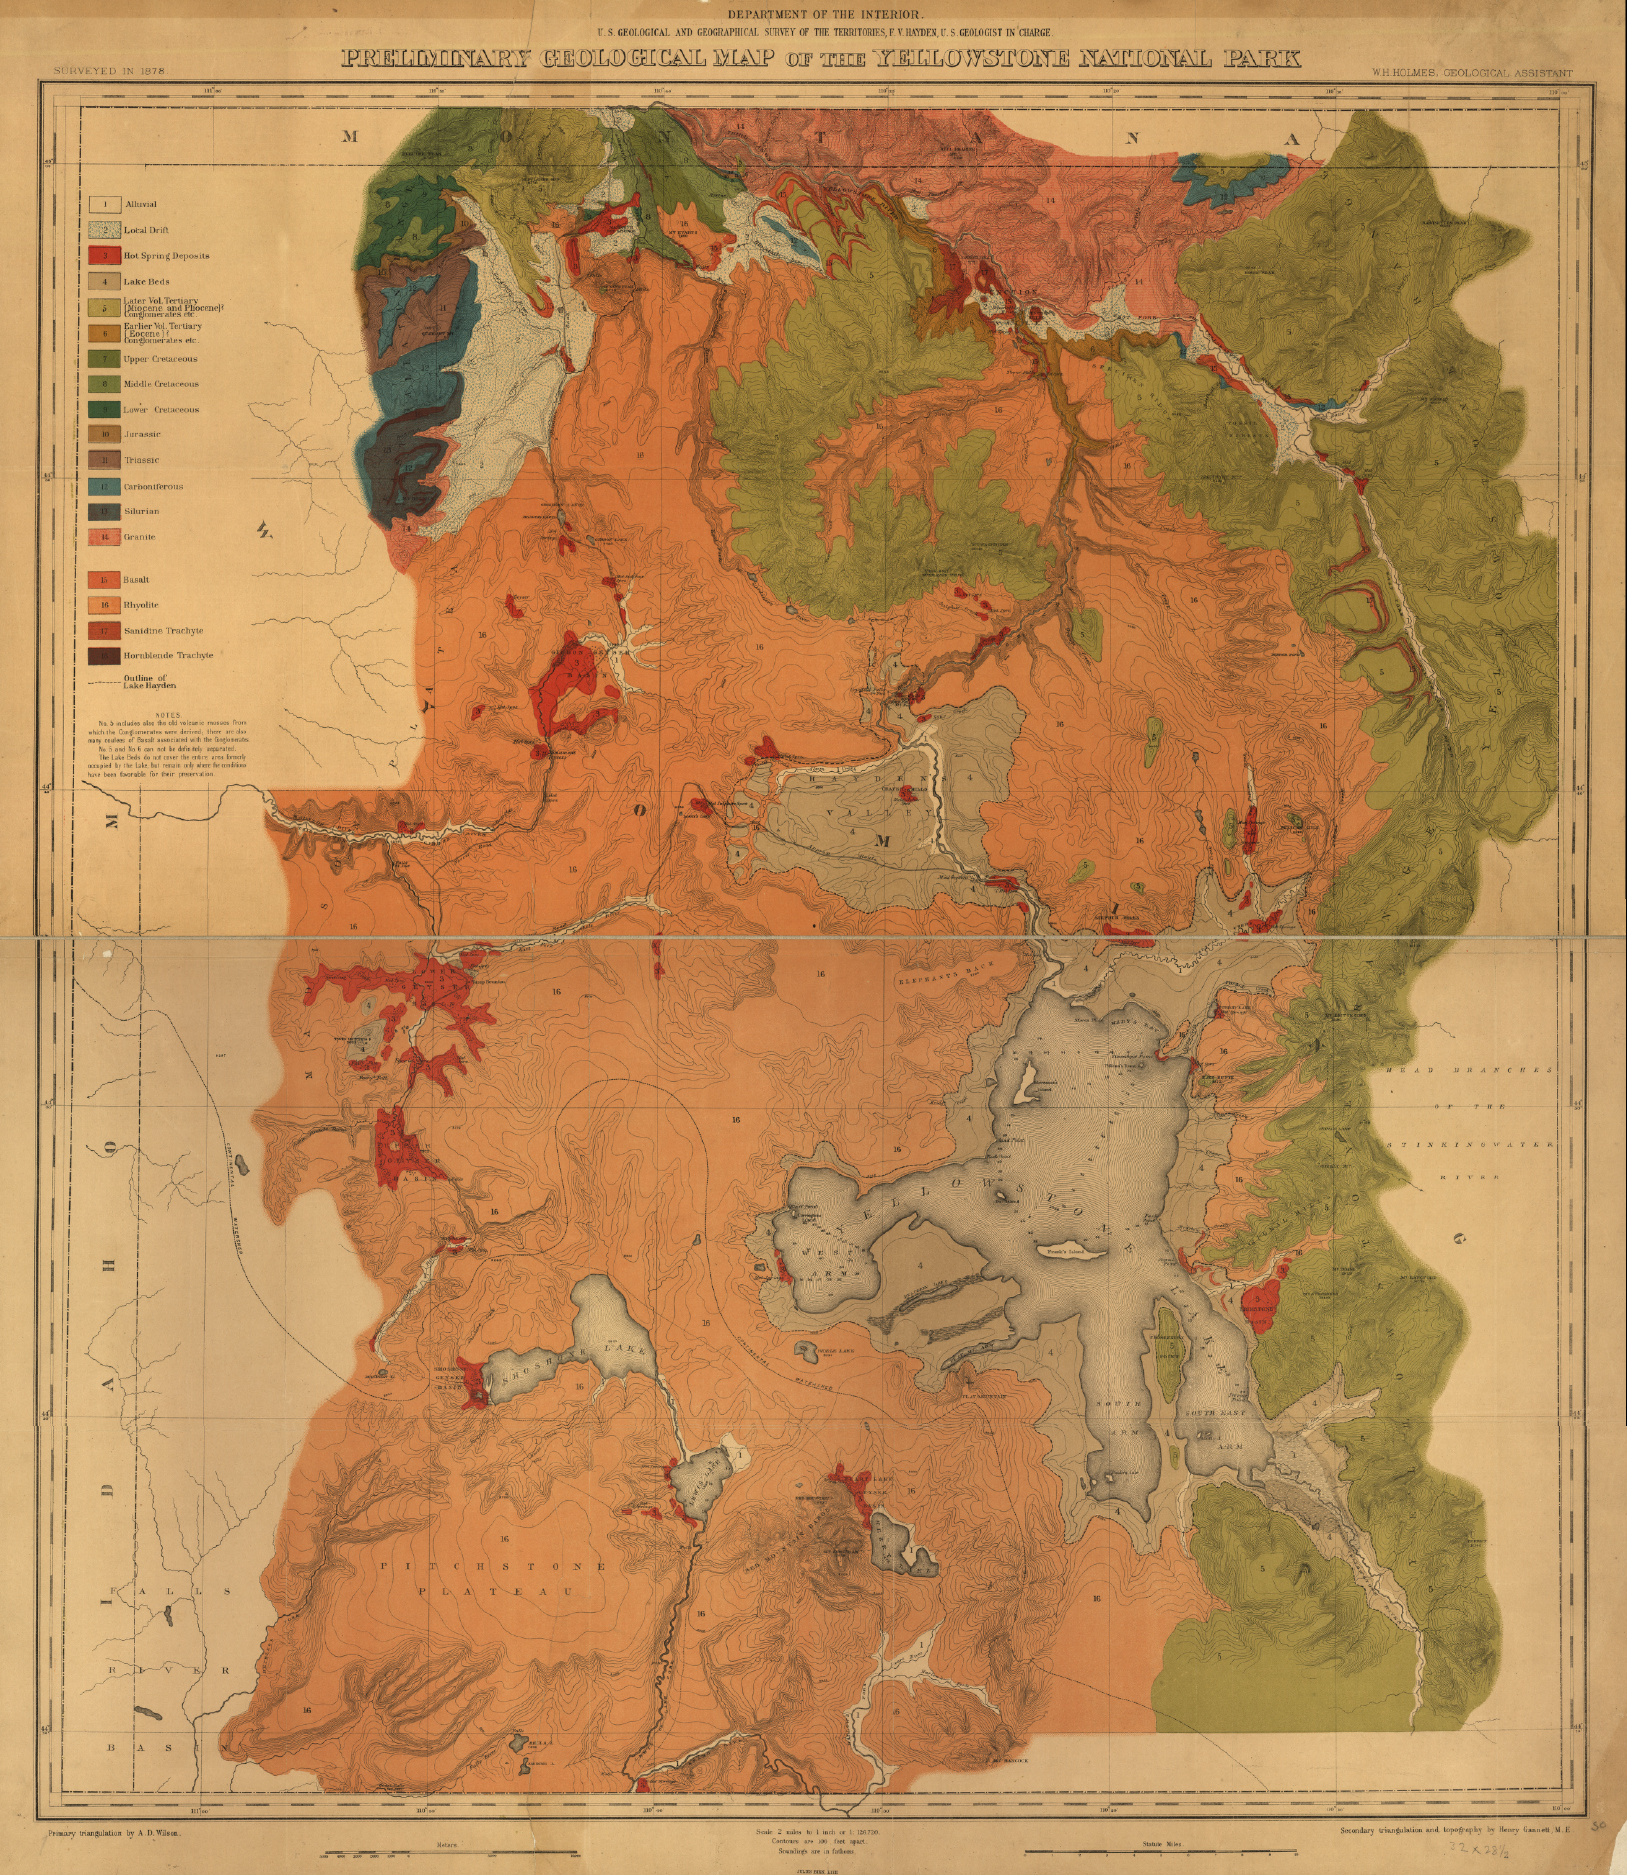 Yellowstone National Park 1878 Survey Map from the Library of Congress Collection